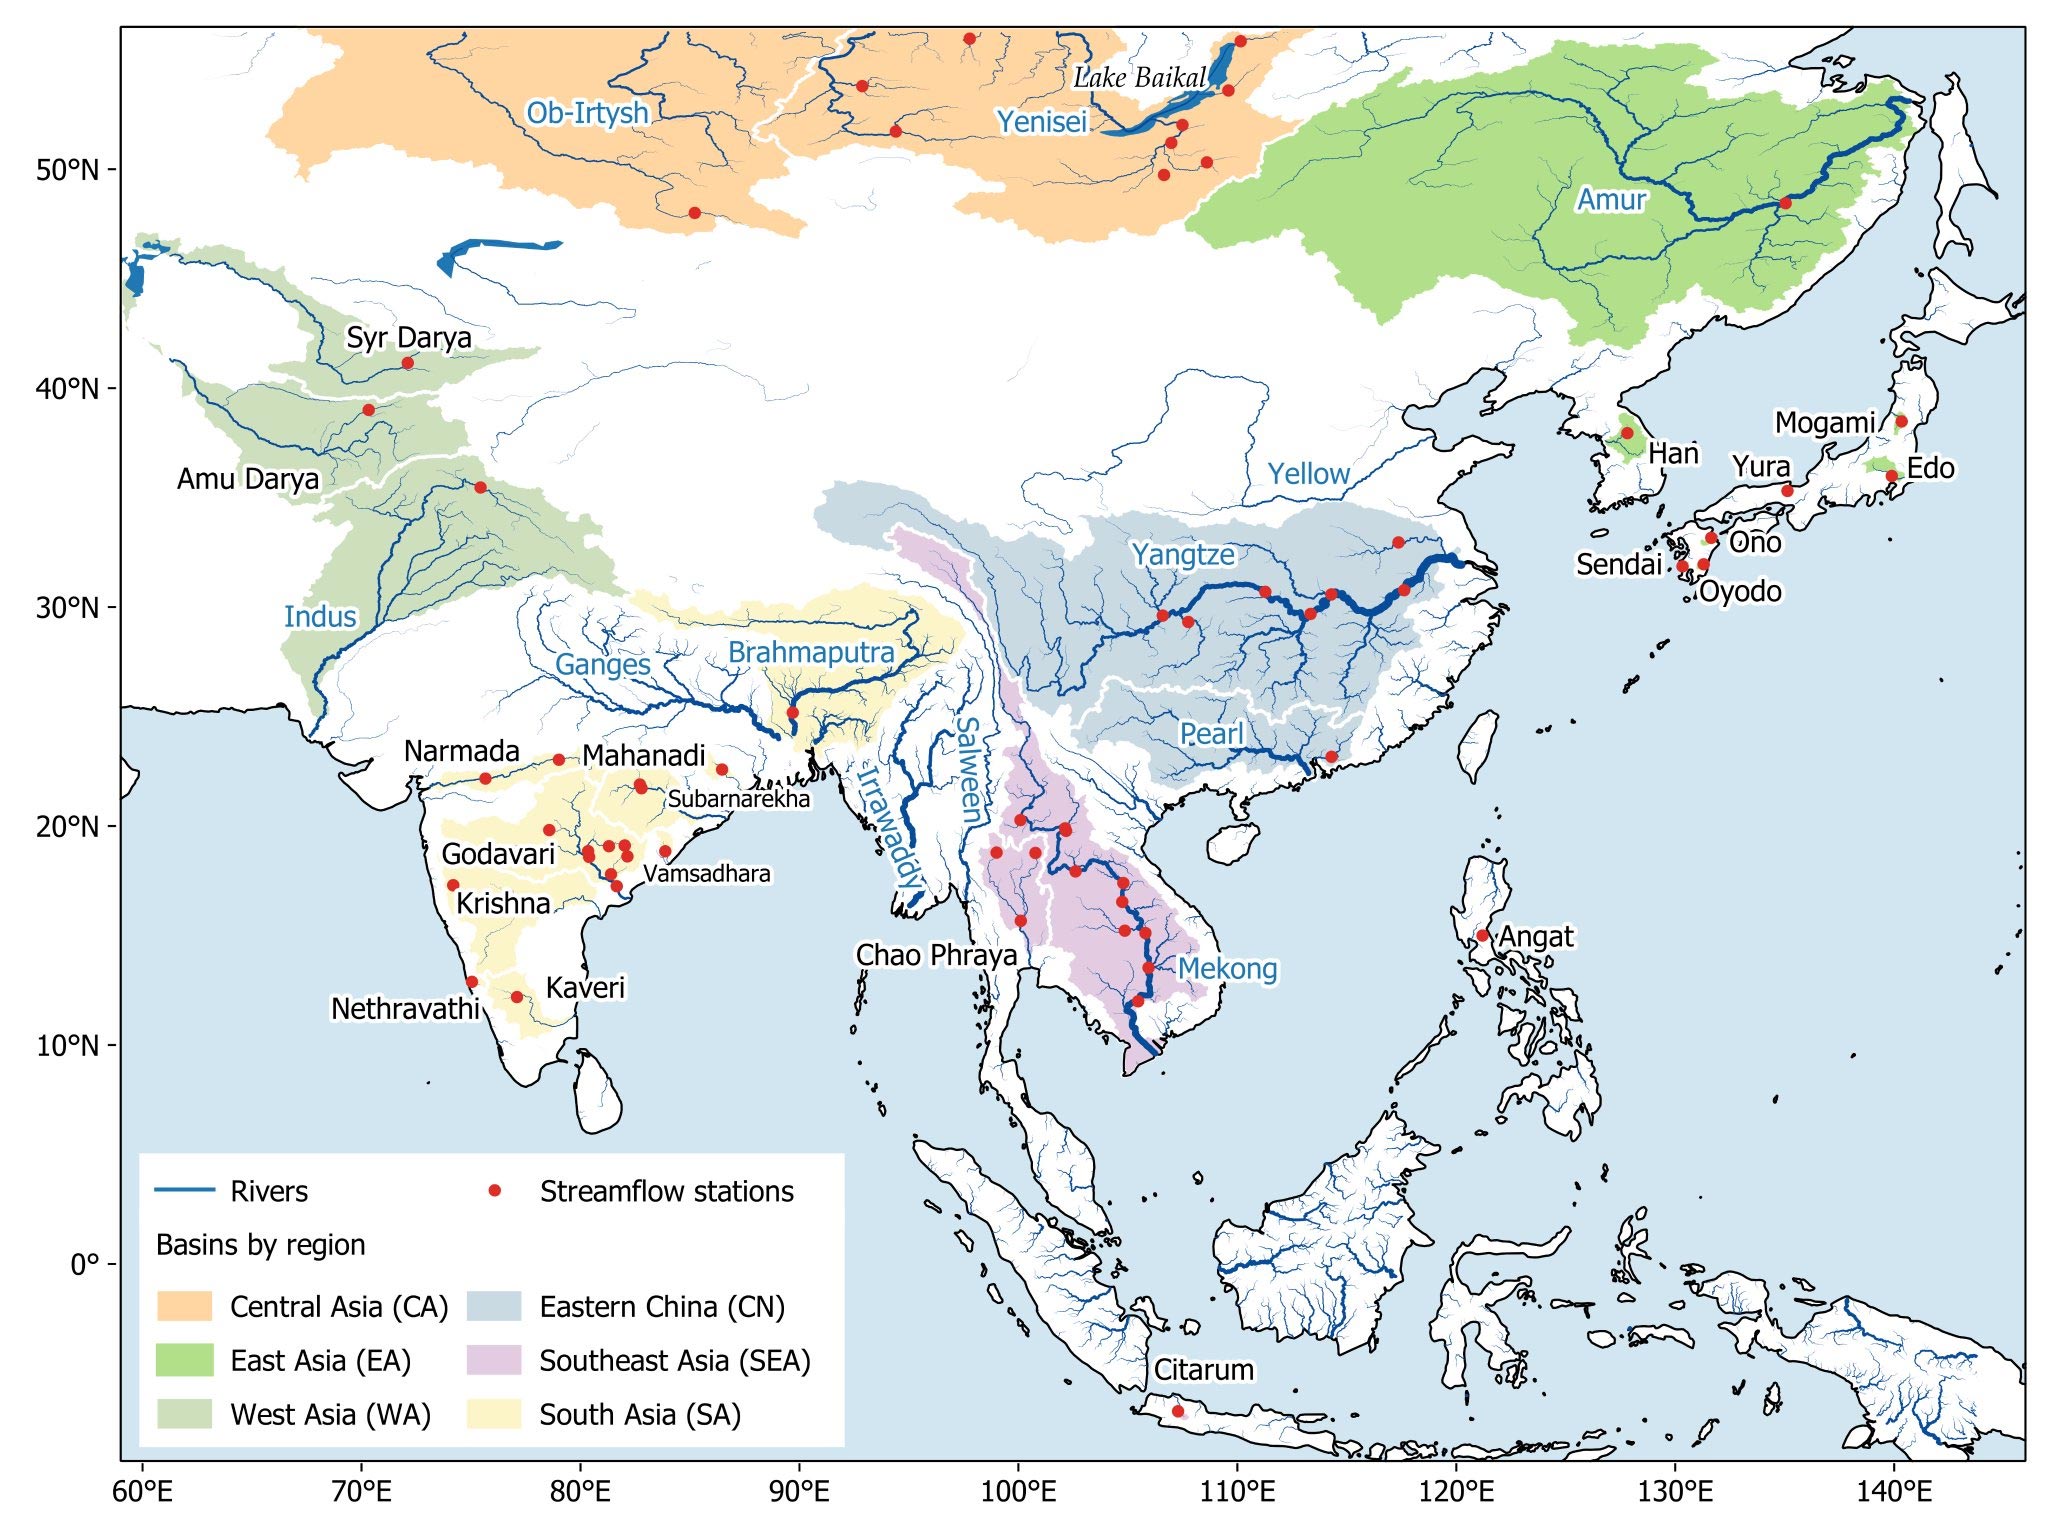 800 Years of Paleoclimate Patterns Unearthed in Largest Study of Asia's Rivers - SciTechDaily